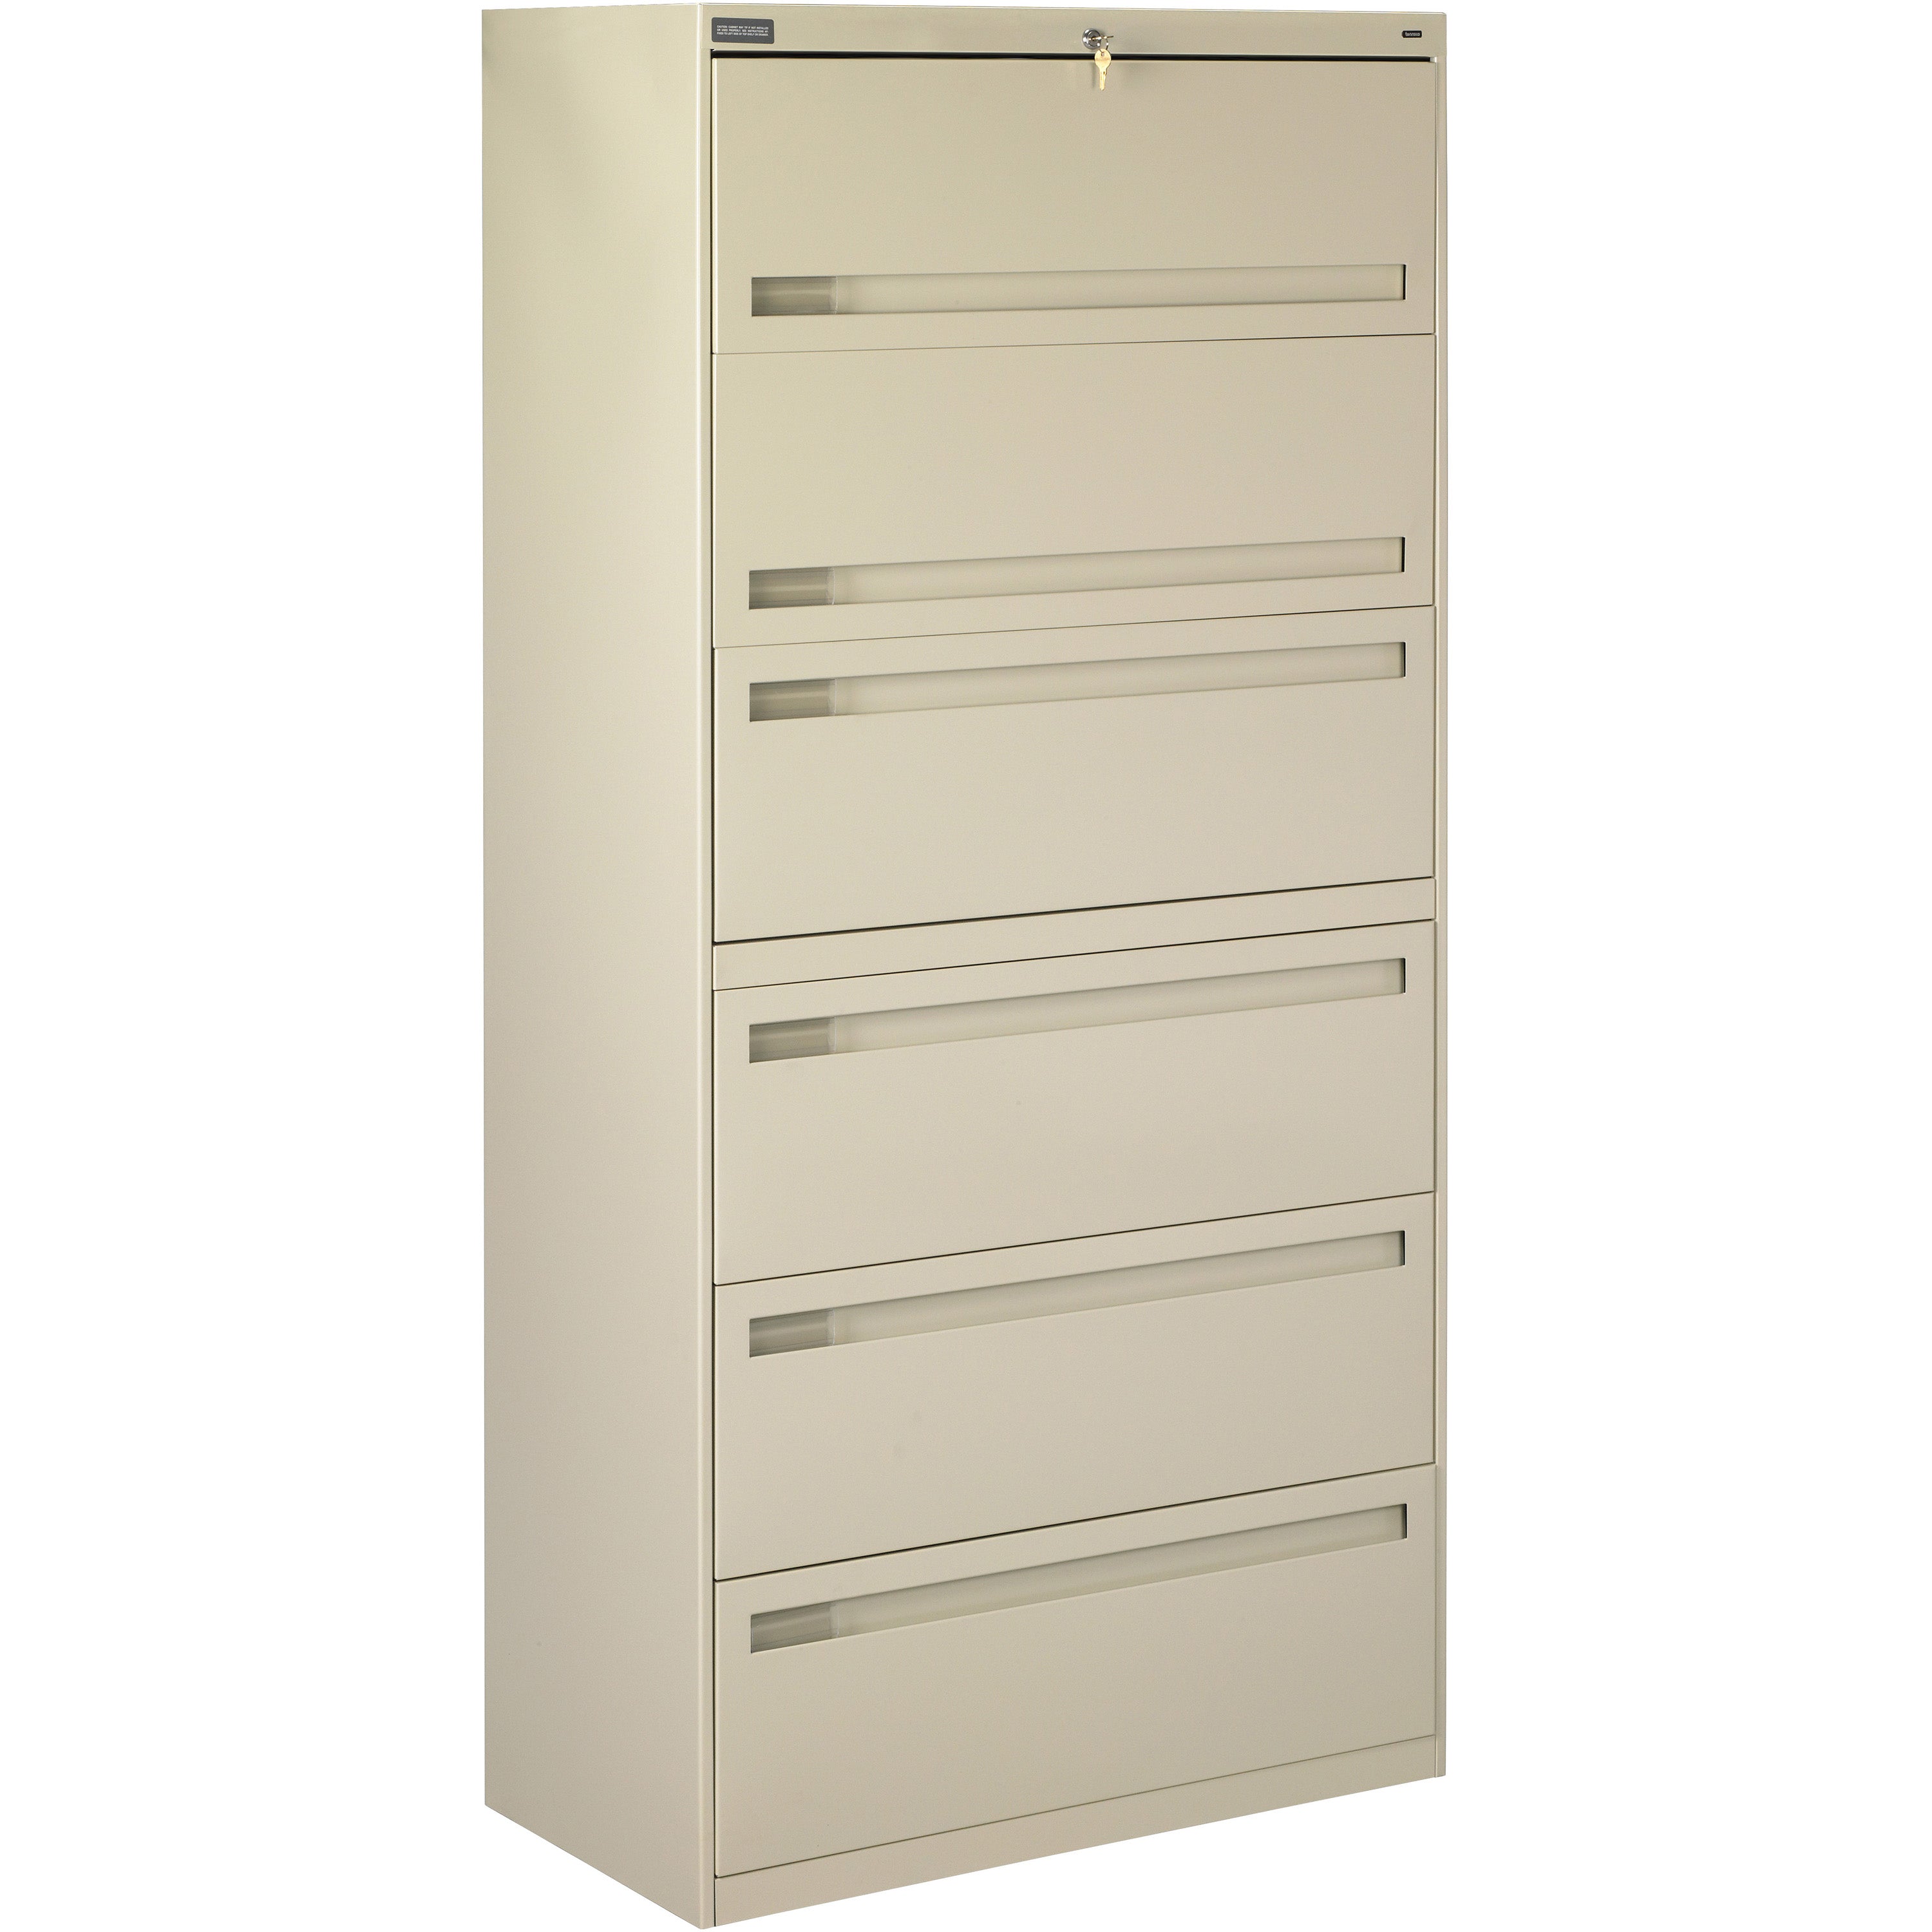 Tennsco 36" Wide Six-Drawer Lateral File with Retractable Doors and Fixed Drawer Fronts, LPL3672L60